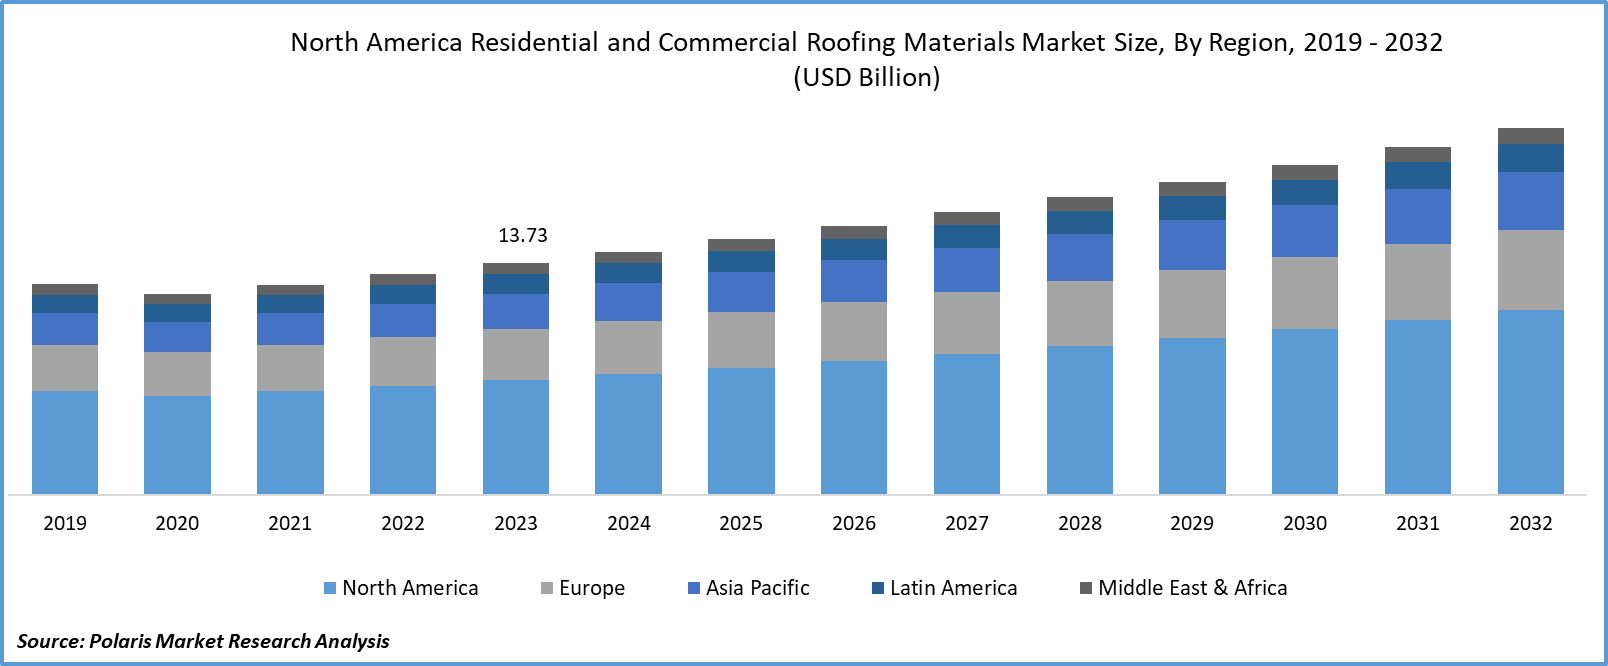 North America Residential and Commercial Roofing Materials Market Size